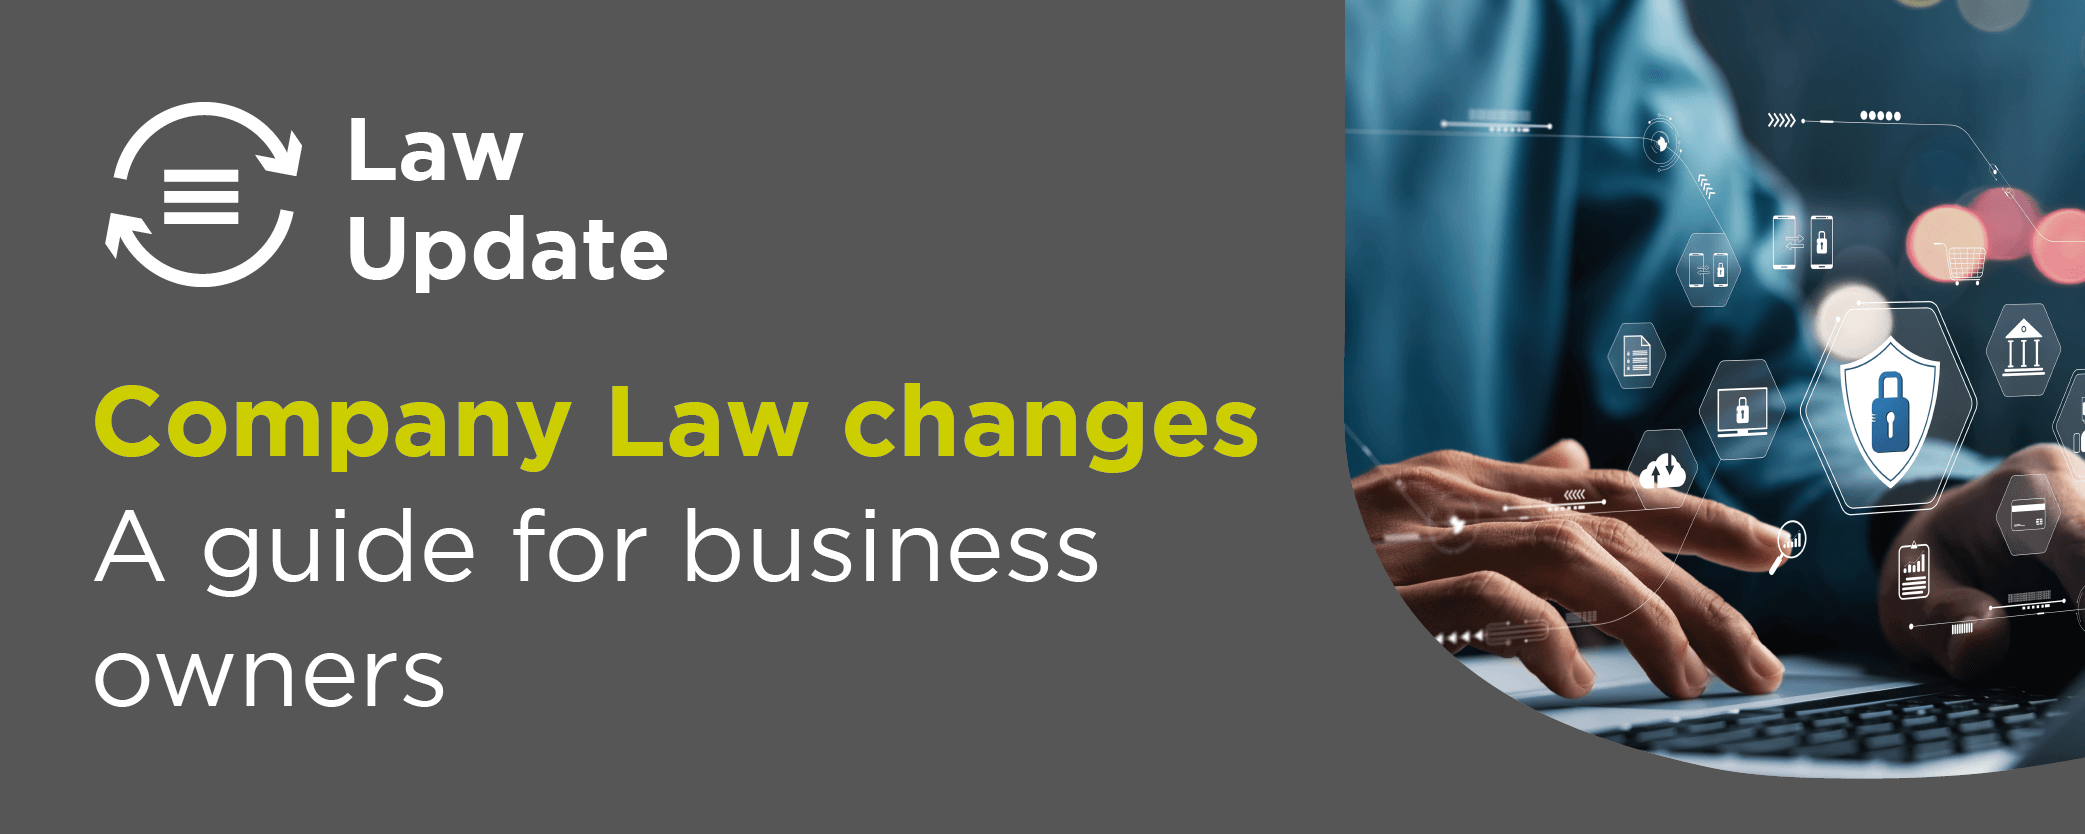 Company Law changes: A guide for business owners